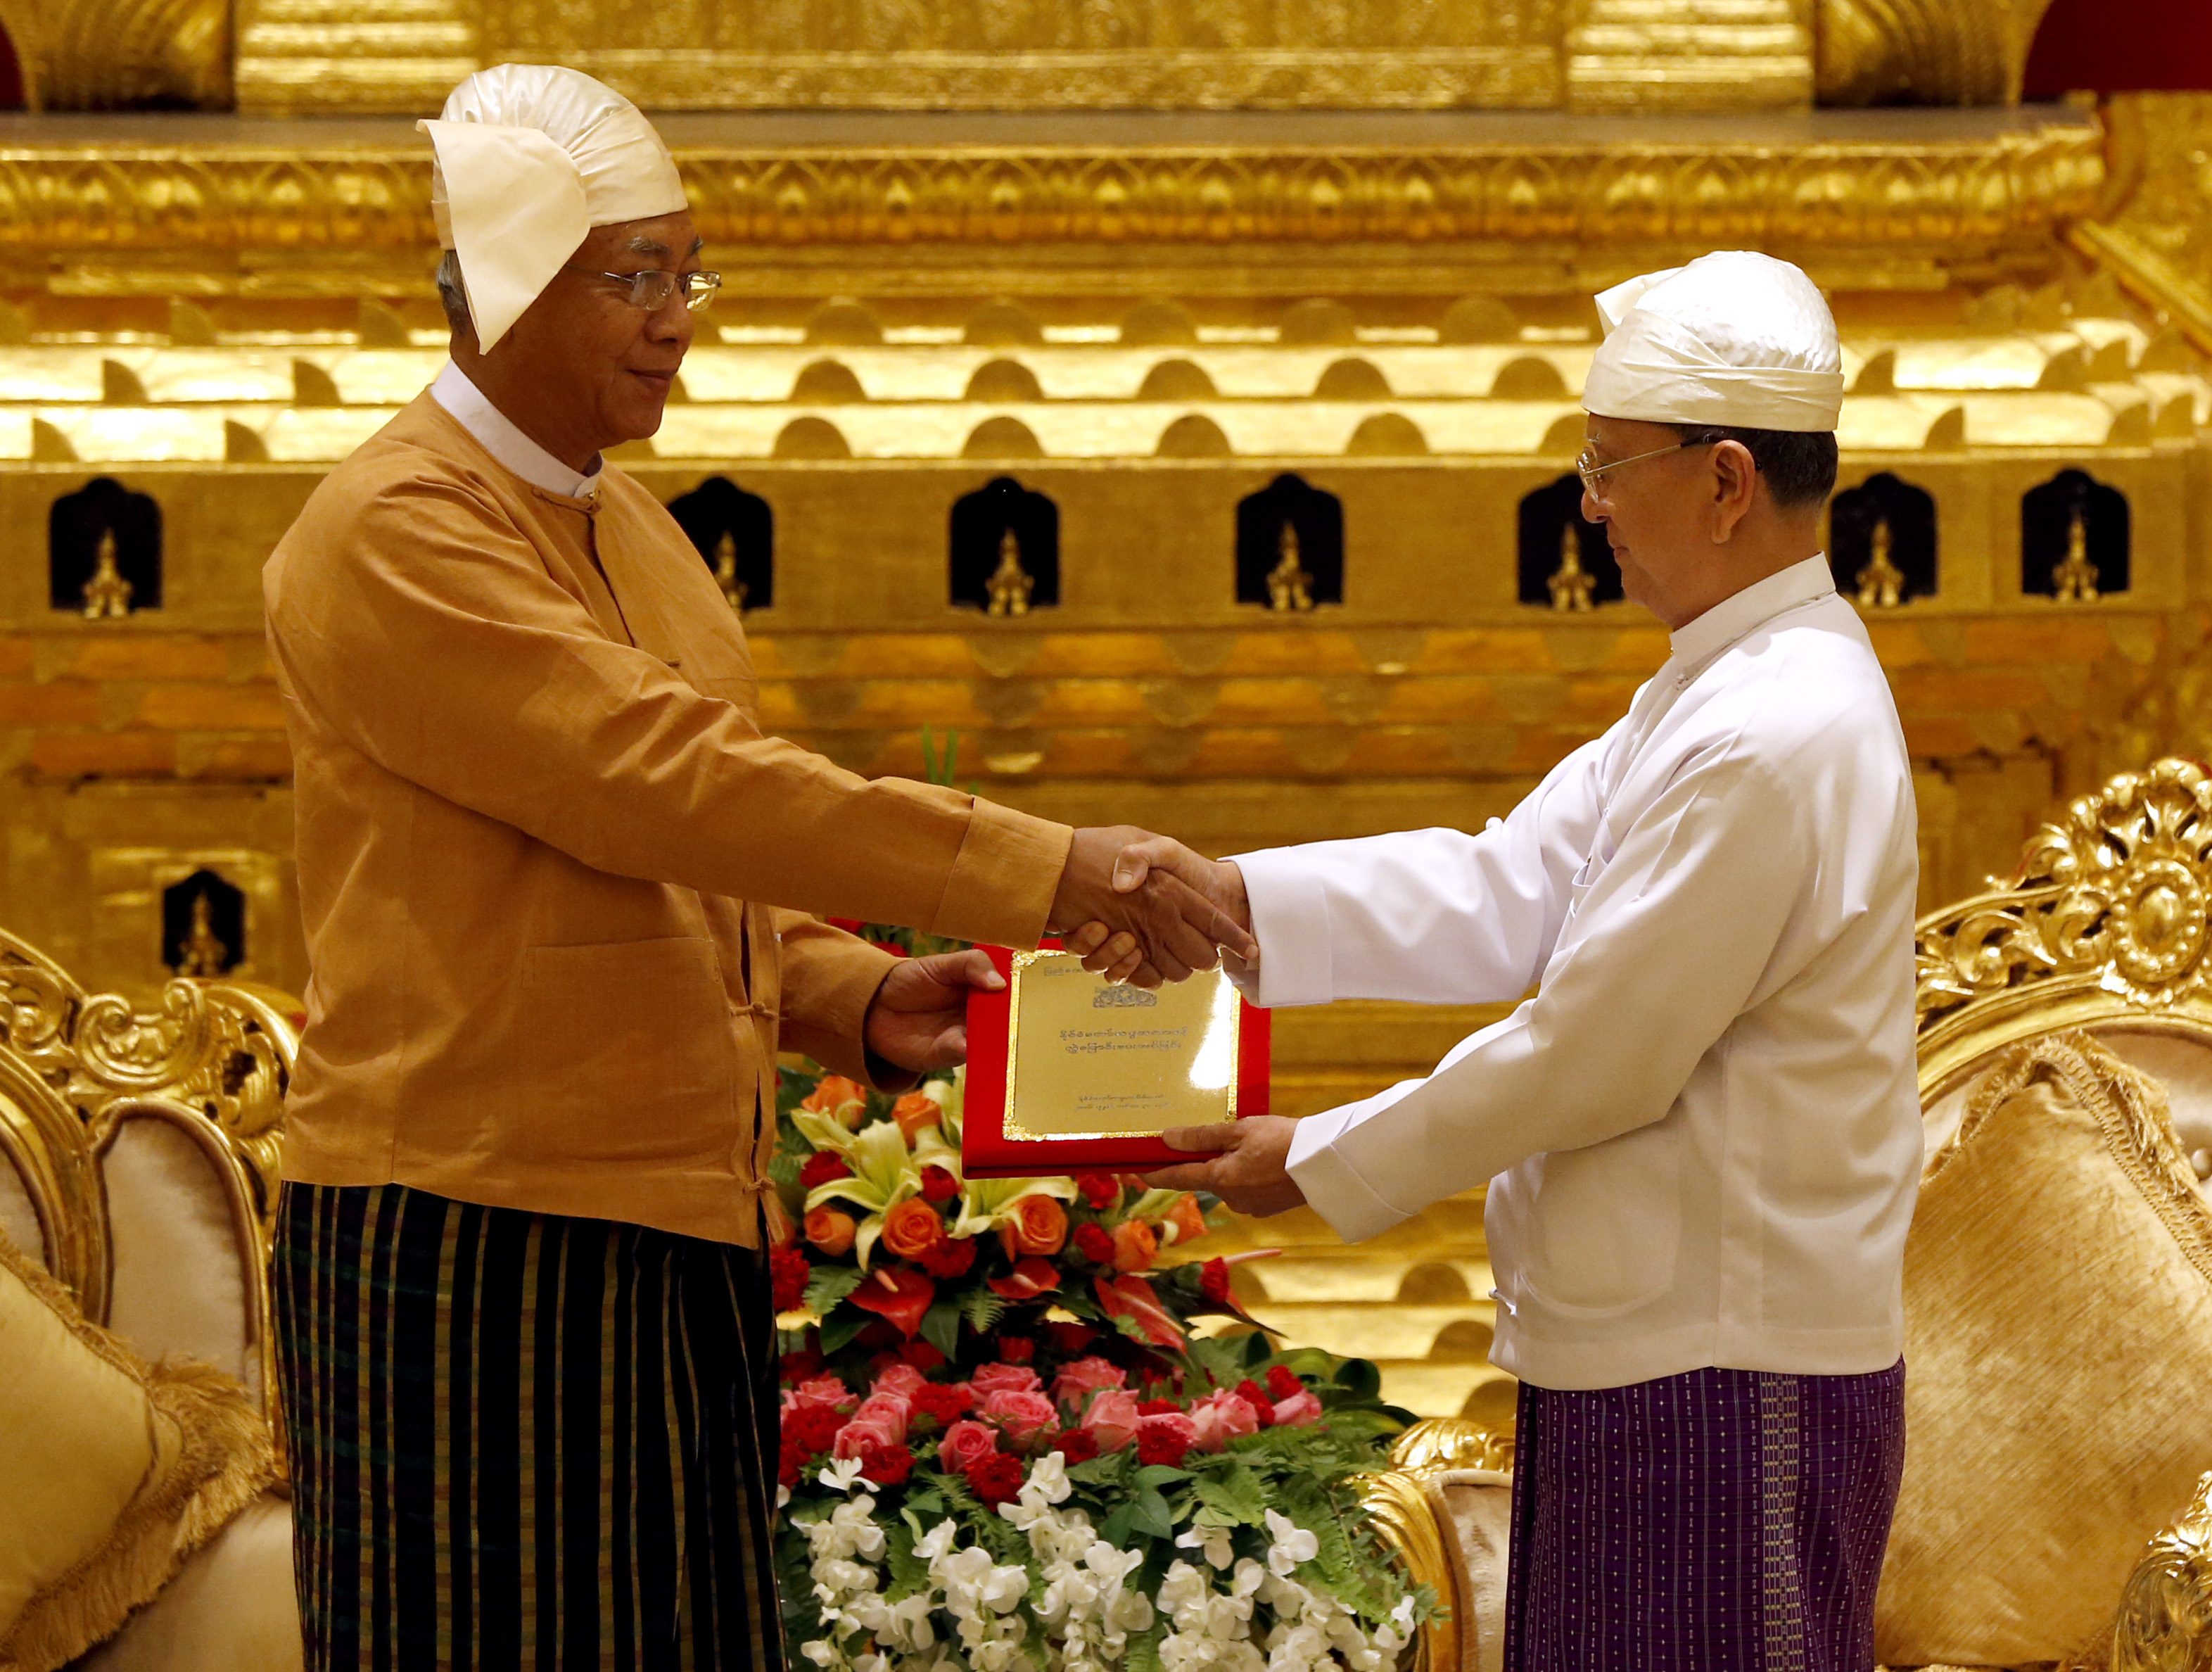 HANDOVER. Myanmar's new president Htin Kyaw (L) receives the seals by outgoing president Thein Sein (R) at the presidential palace in Naypyitaw, Myanmar, March 30, 2016. Photo by Nyein Chan Naing/EPA 